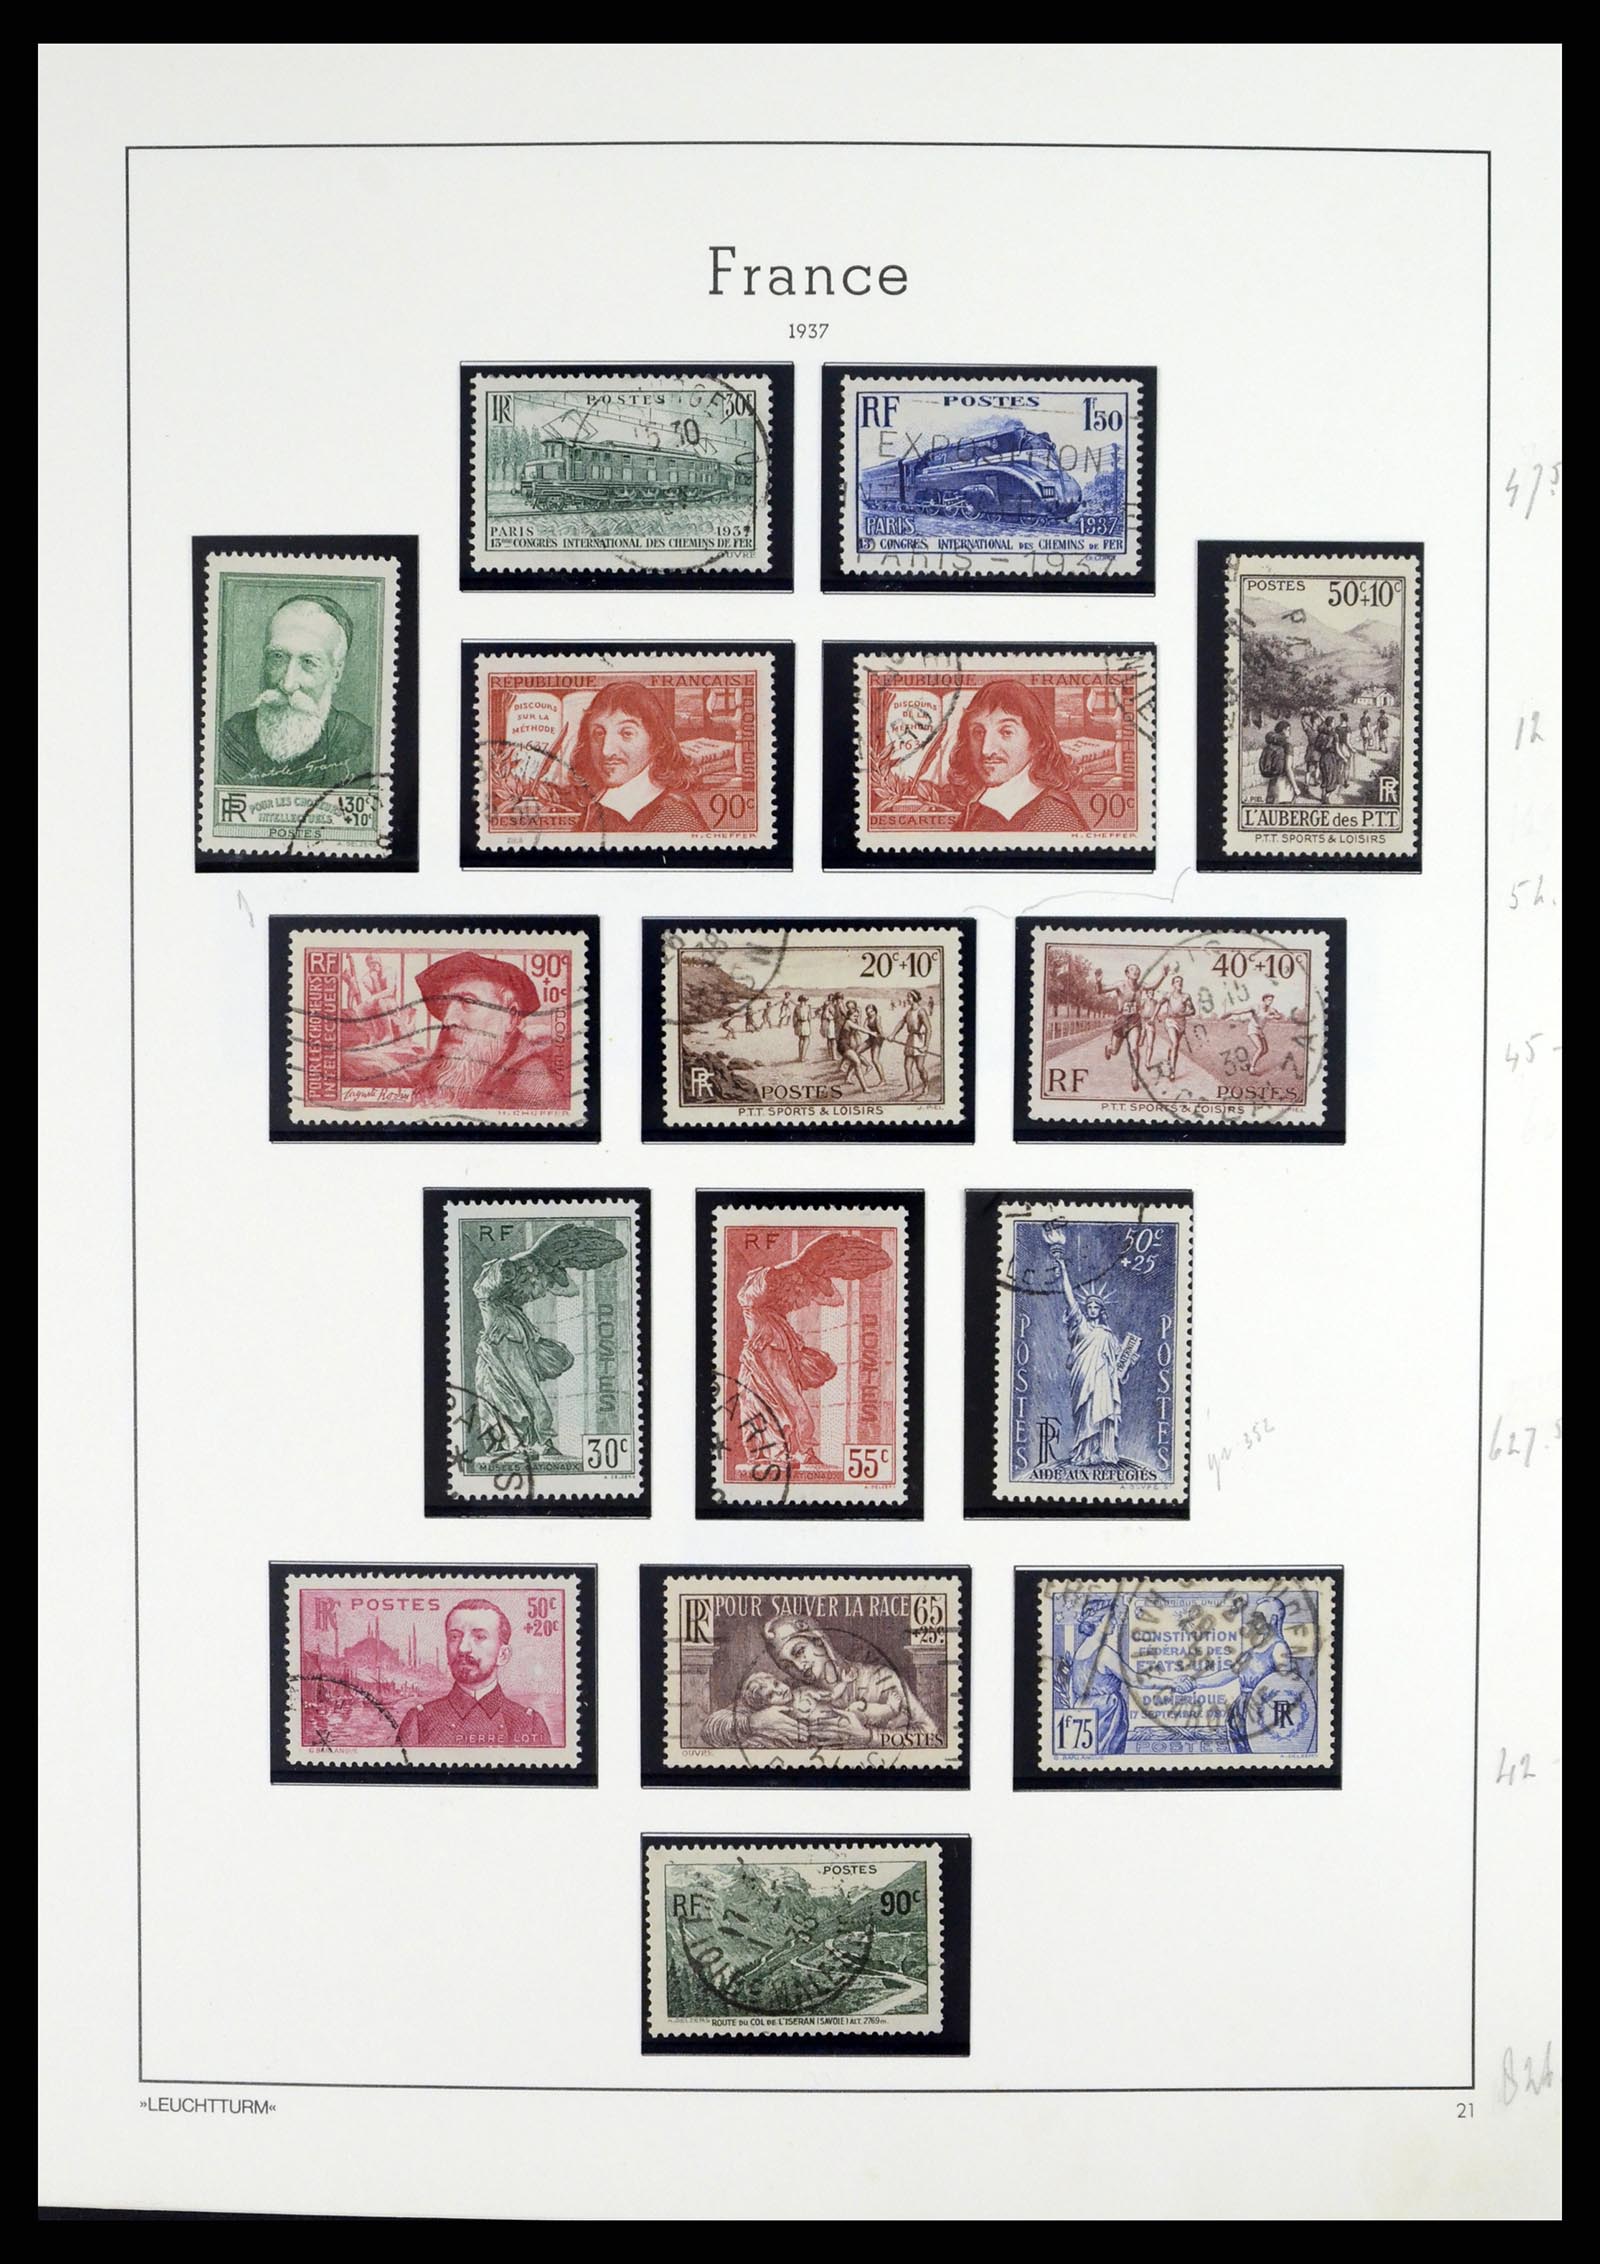 37415 027 - Stamp collection 37415 France 1849-2005.